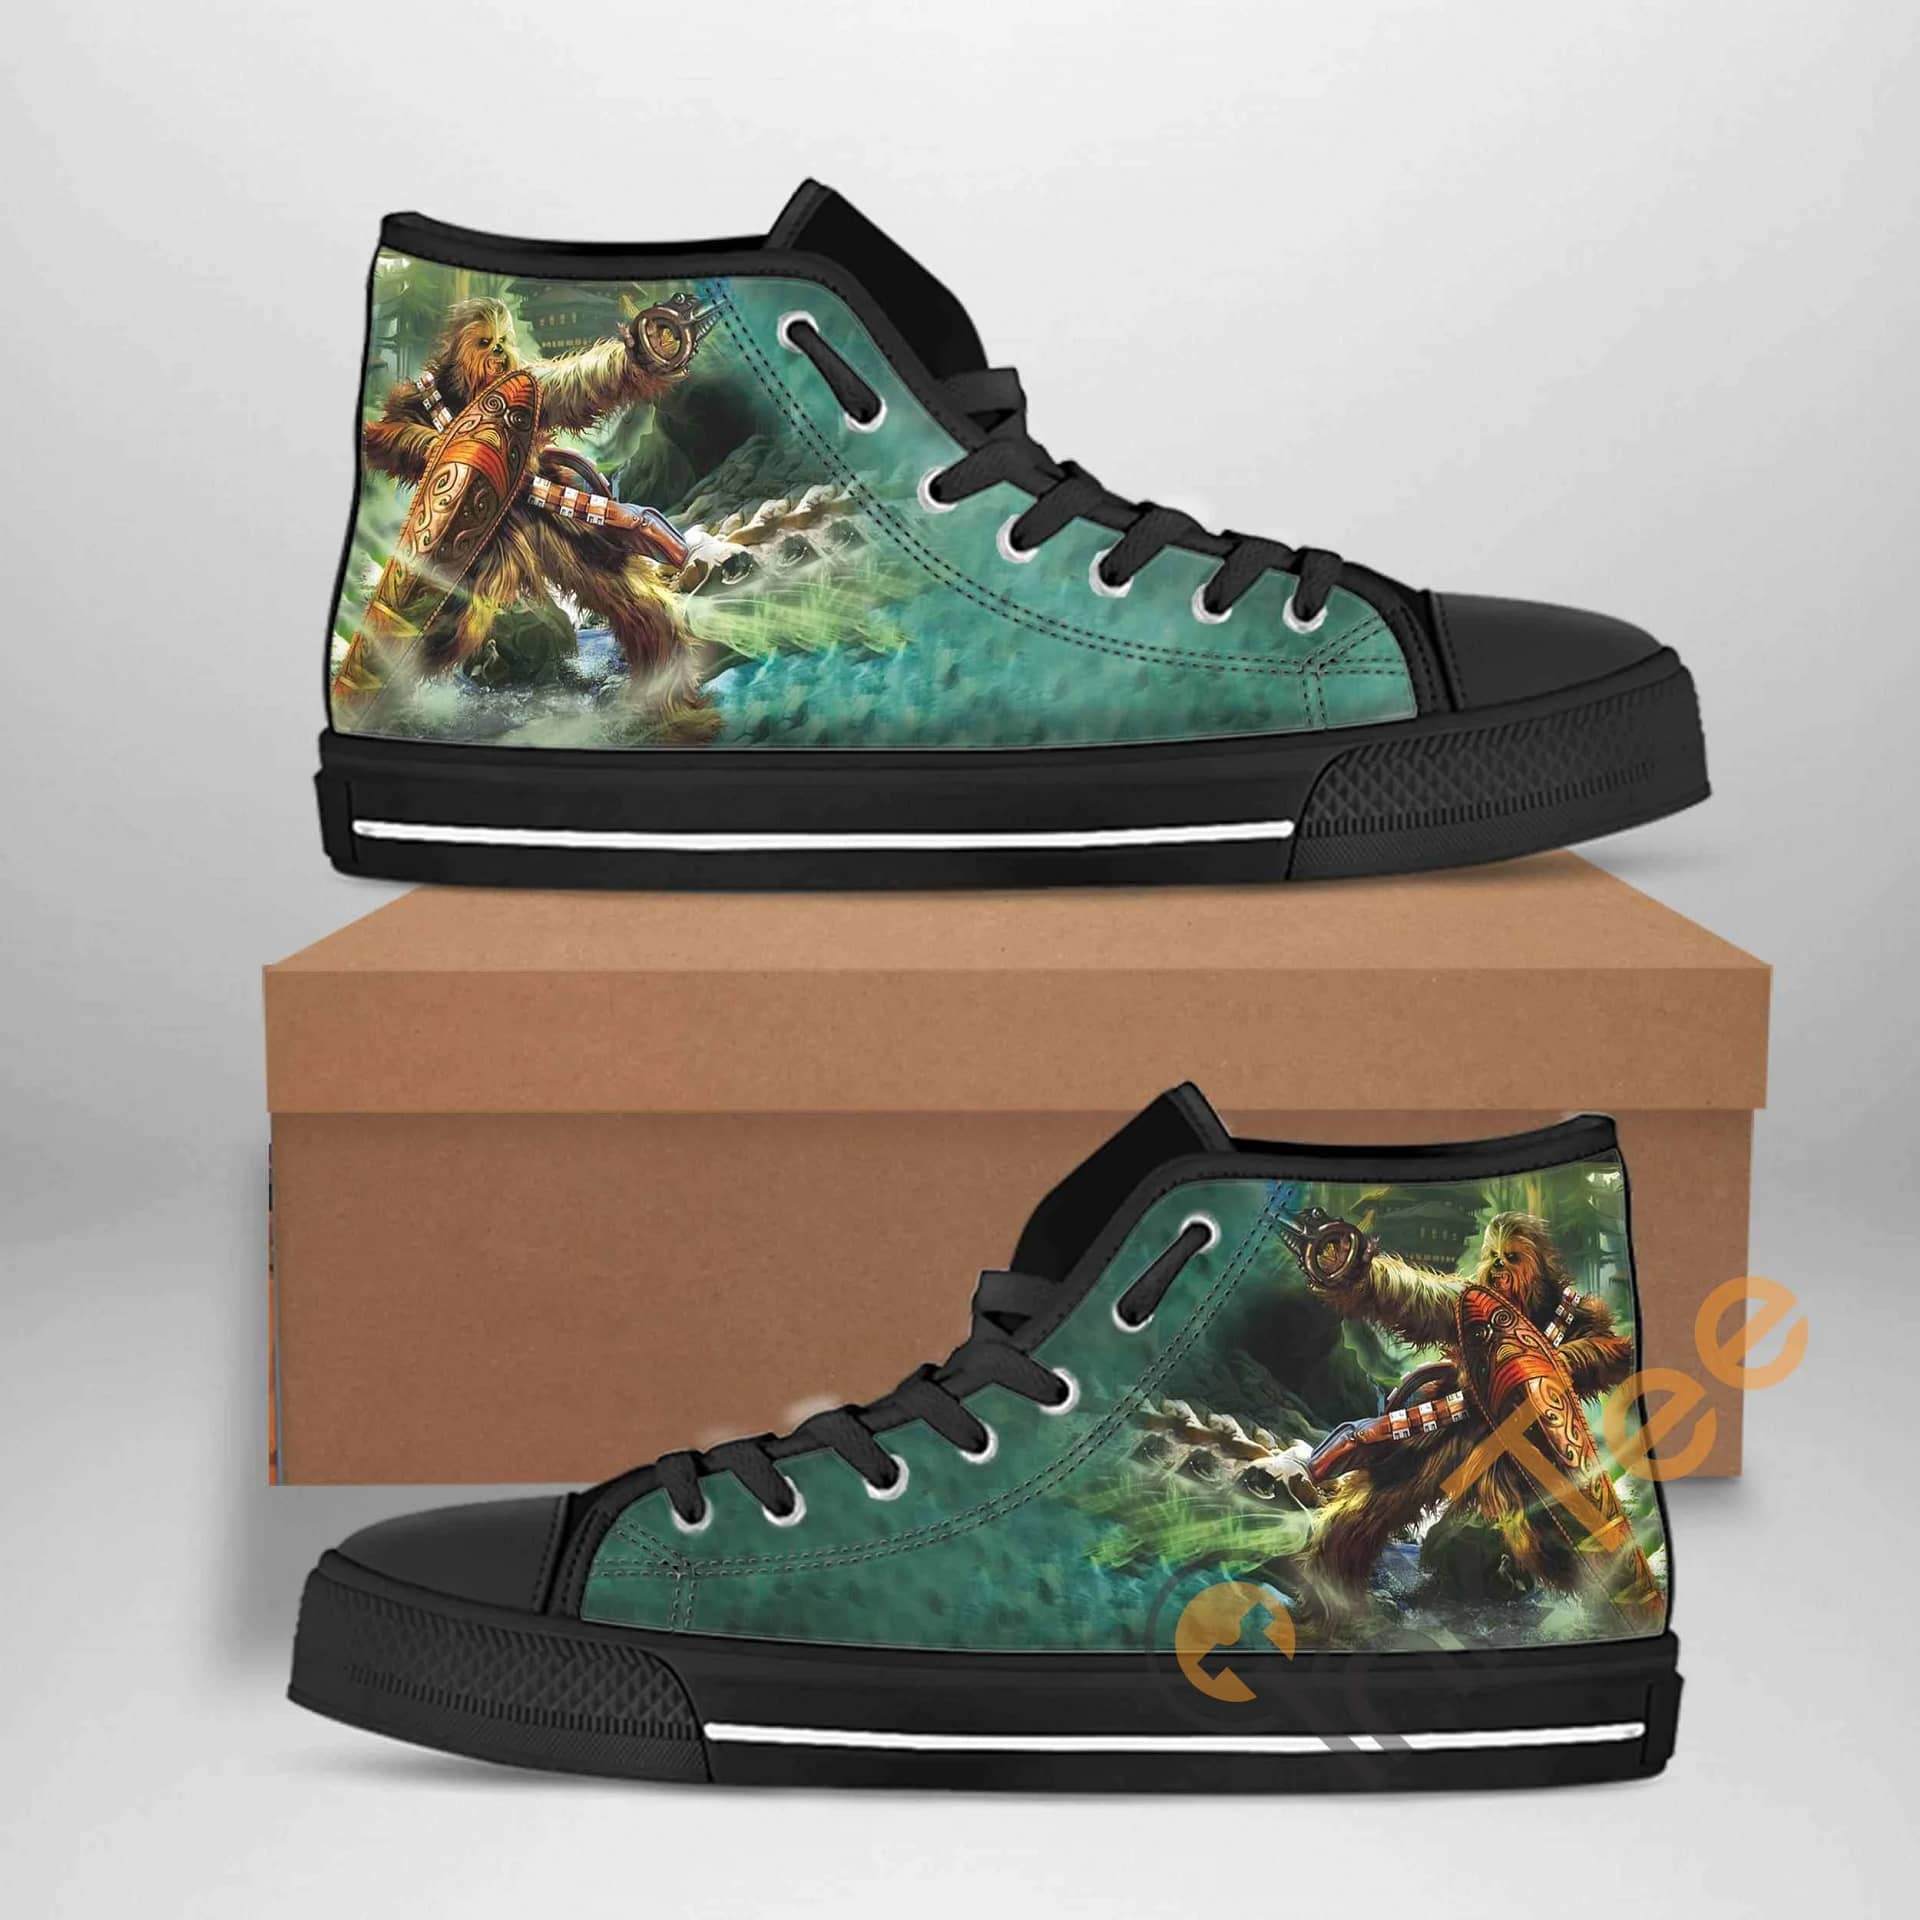 Chewbacca Best Movie Character Amazon Best Seller Sku 1457 High Top Shoes